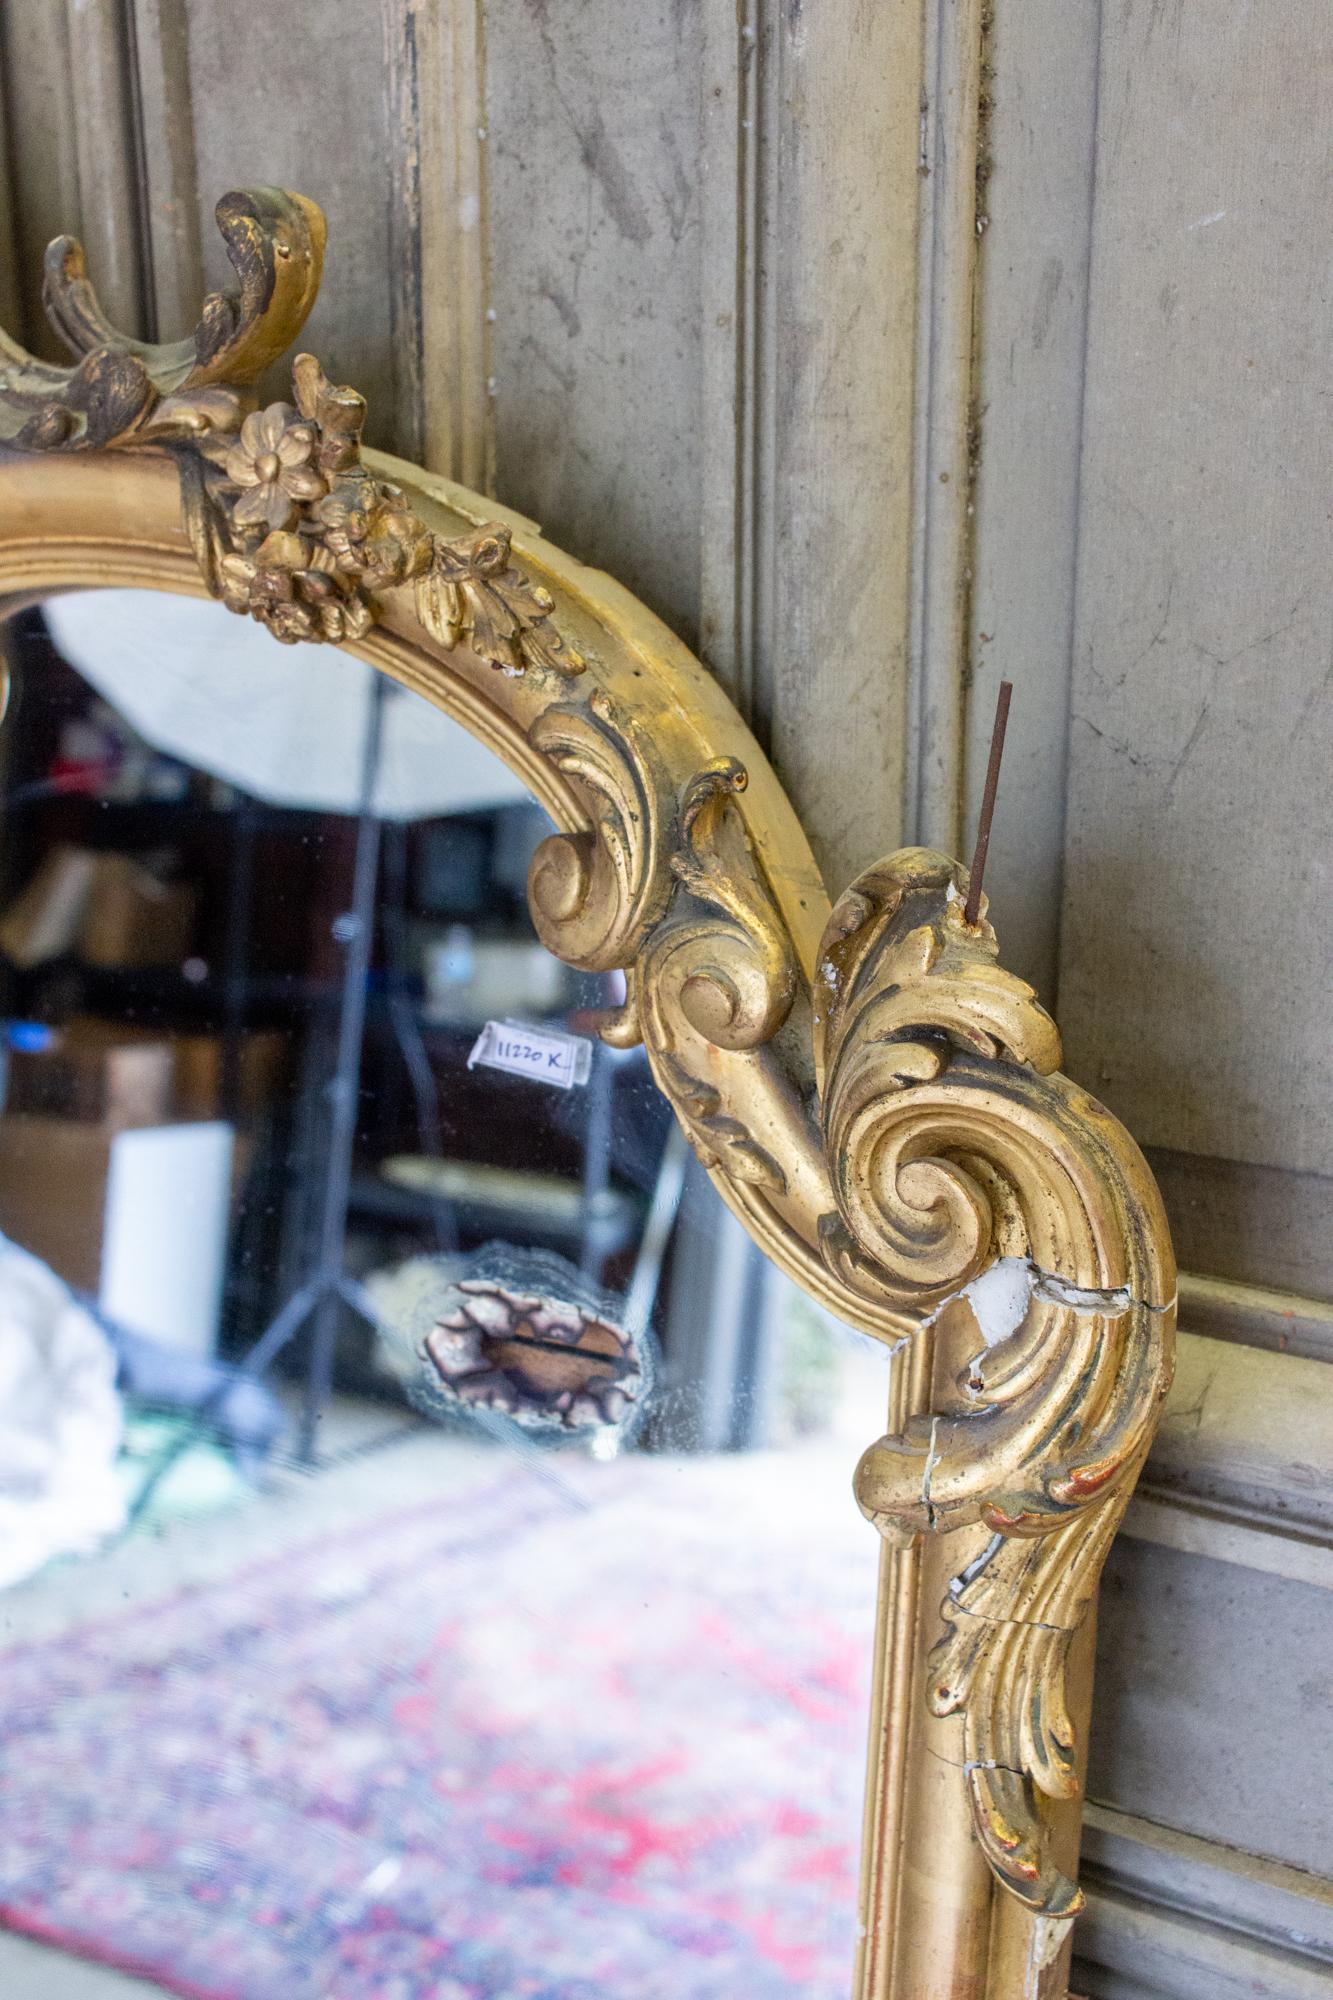 French Antique Gilt Full-Length Mirror with Decorative Carvings and Shell Cartouche